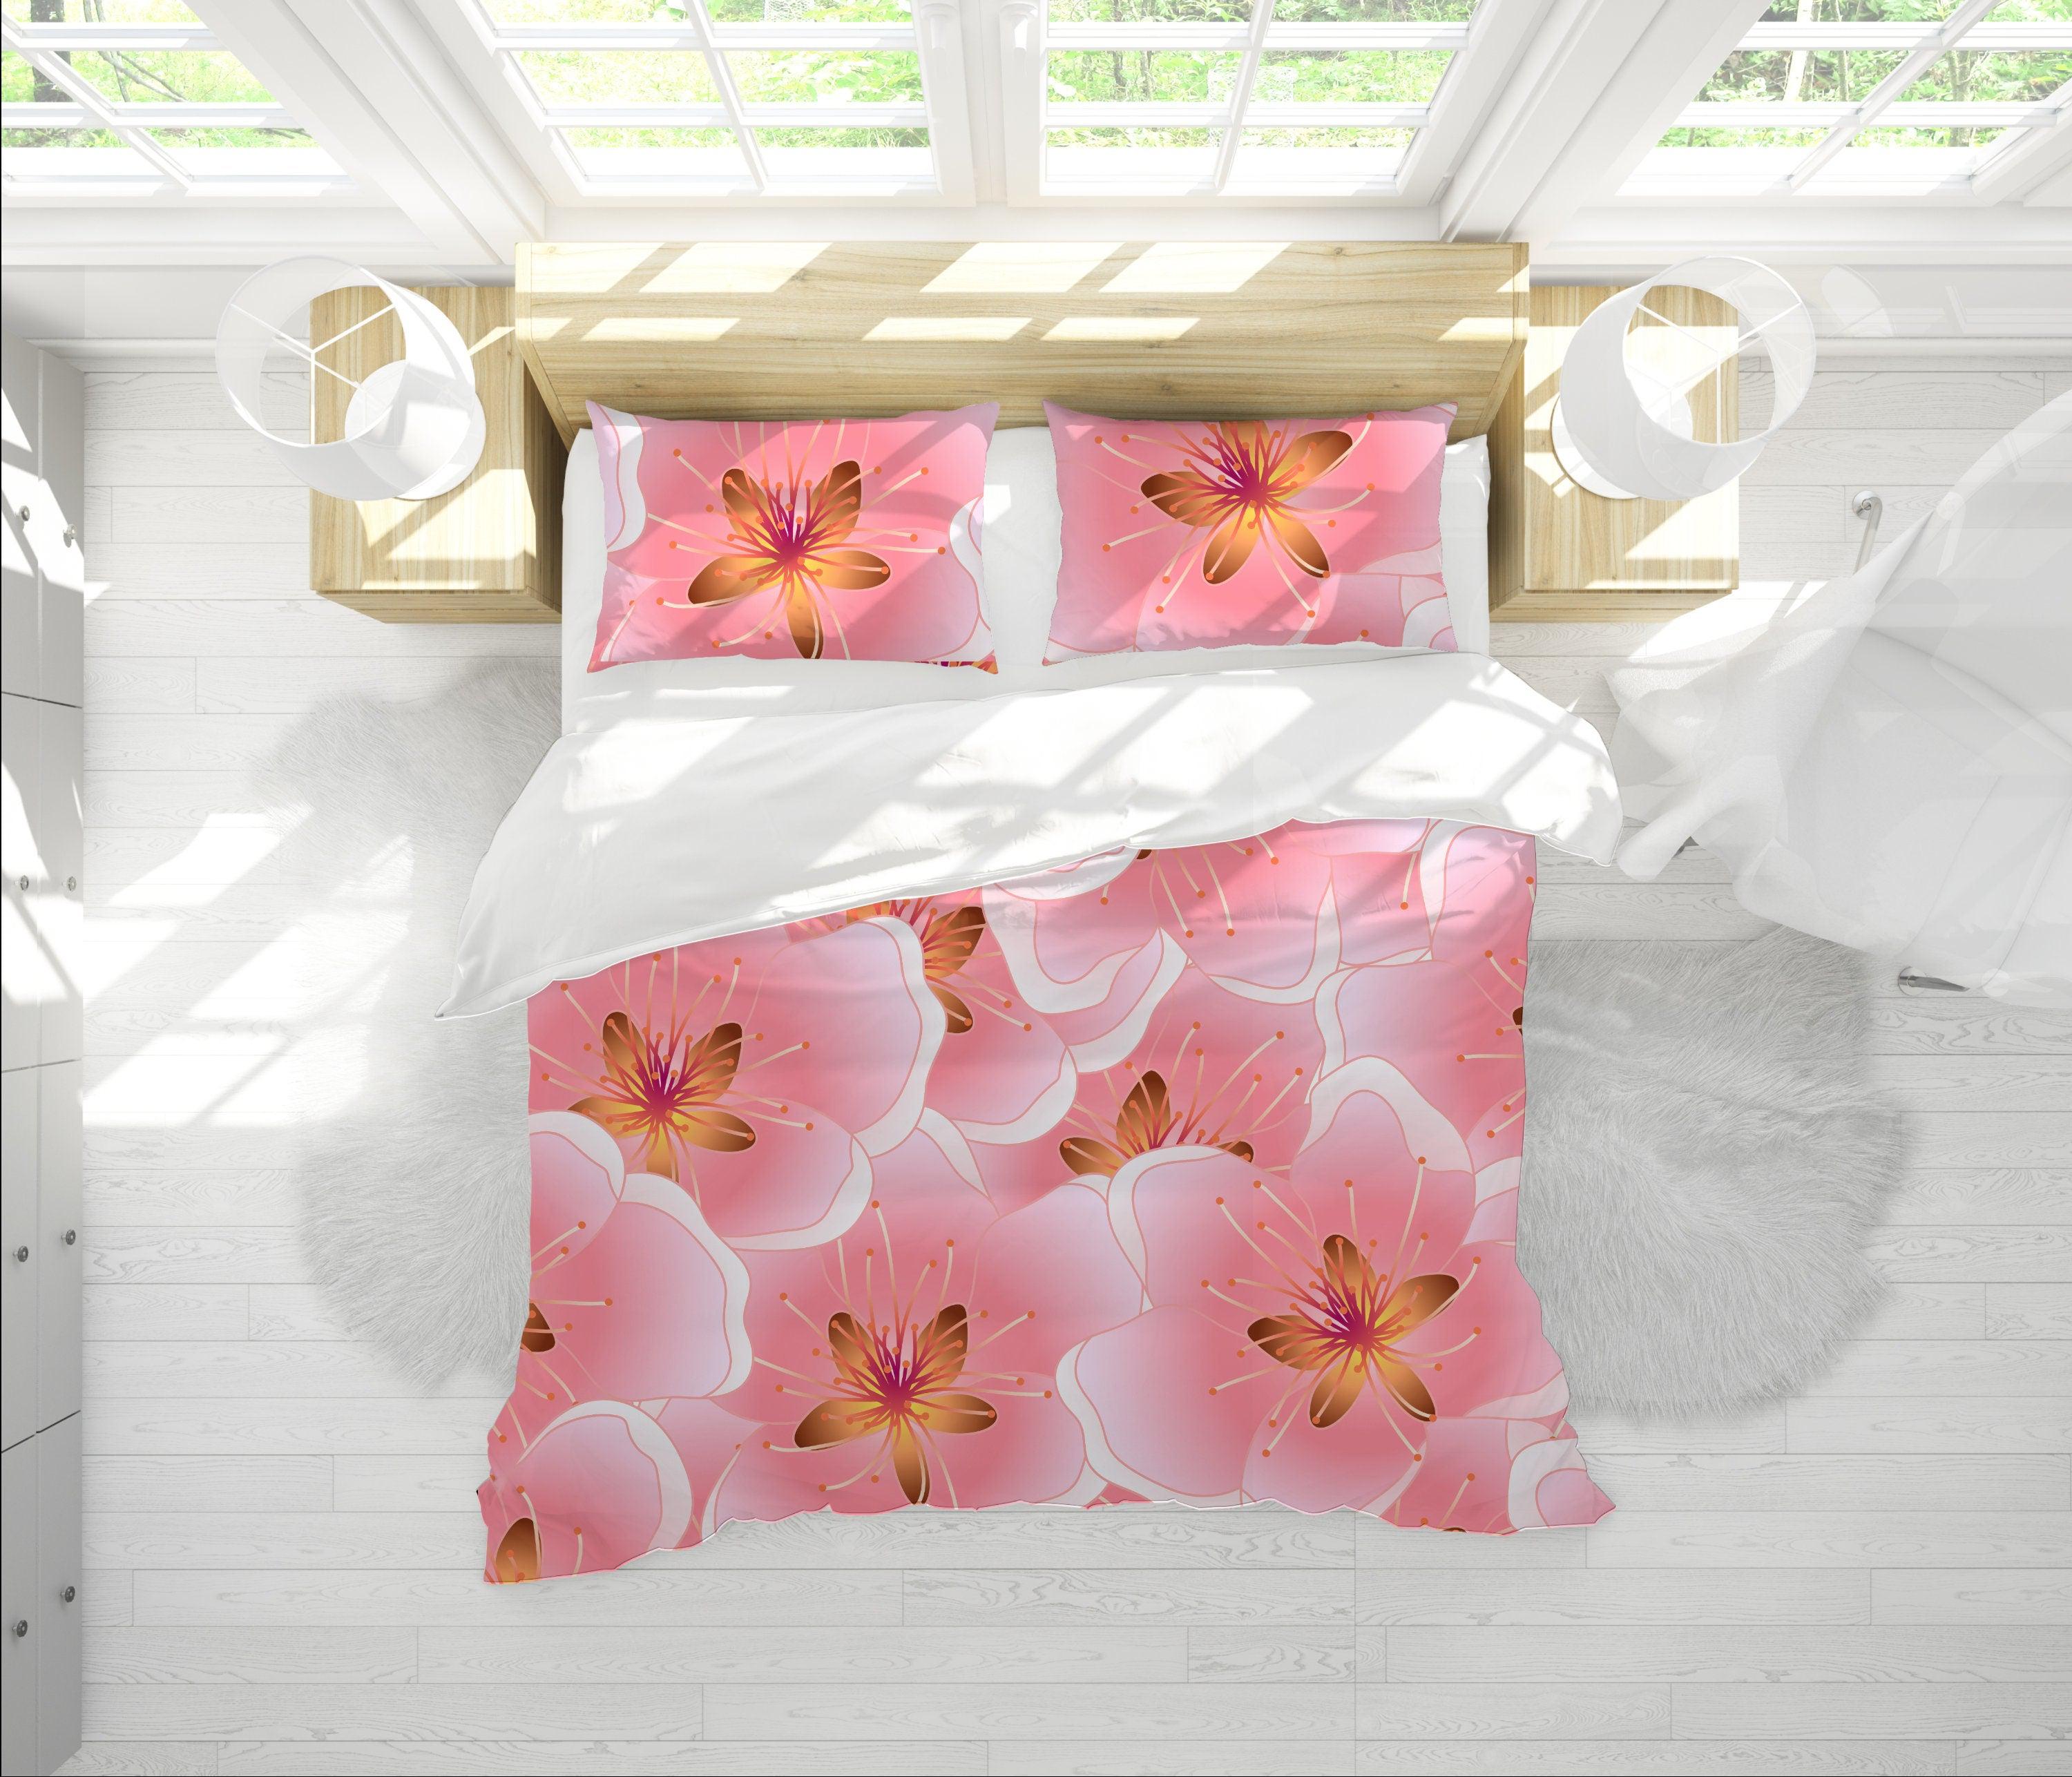 daintyduvet Cherry Blossoms Pink Duvet Cover Set | Floral Bedding Set with Pillow Cover Case